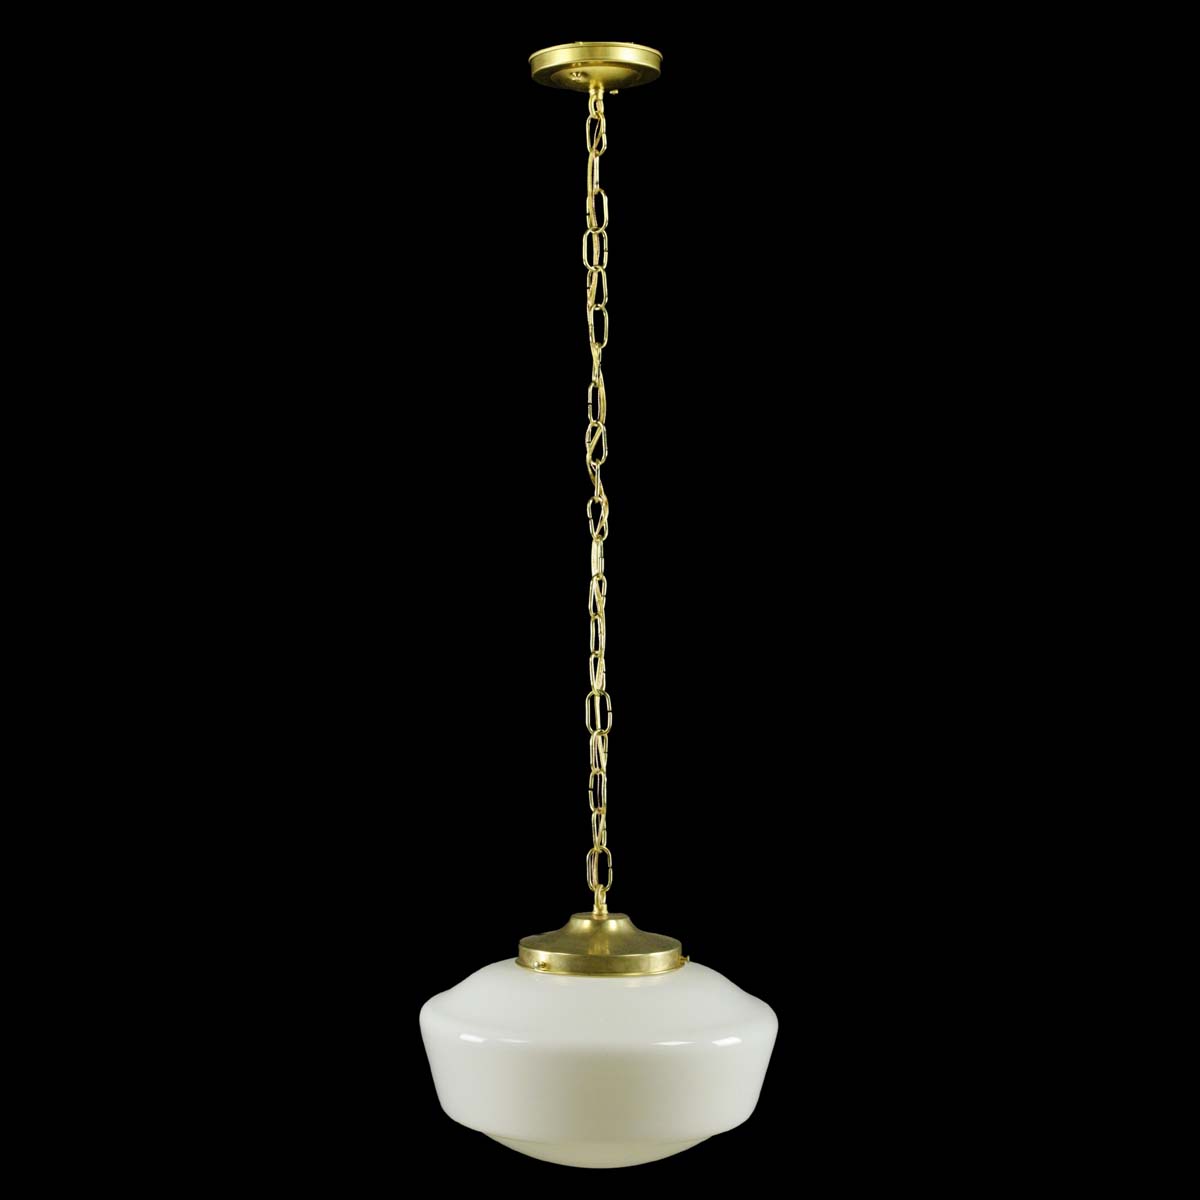 Small ornate gold-plated brass chandelier from Italy — italian-lighting -center